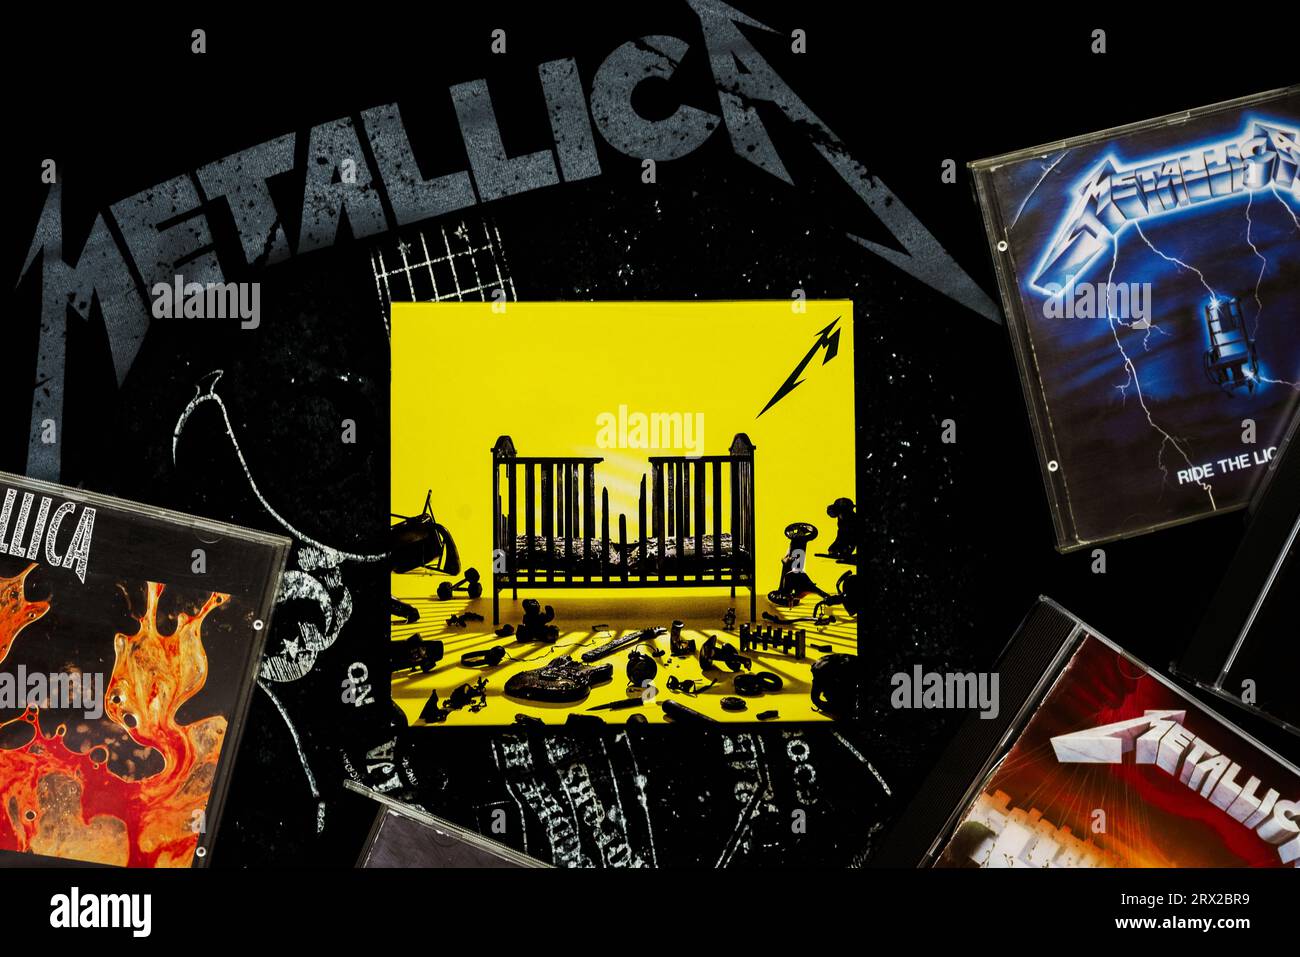 Cover of Metallica 72 Seasons CD and other cds of the american heavy metal group over on a T-shirt with the Metallica logo Stock Photo